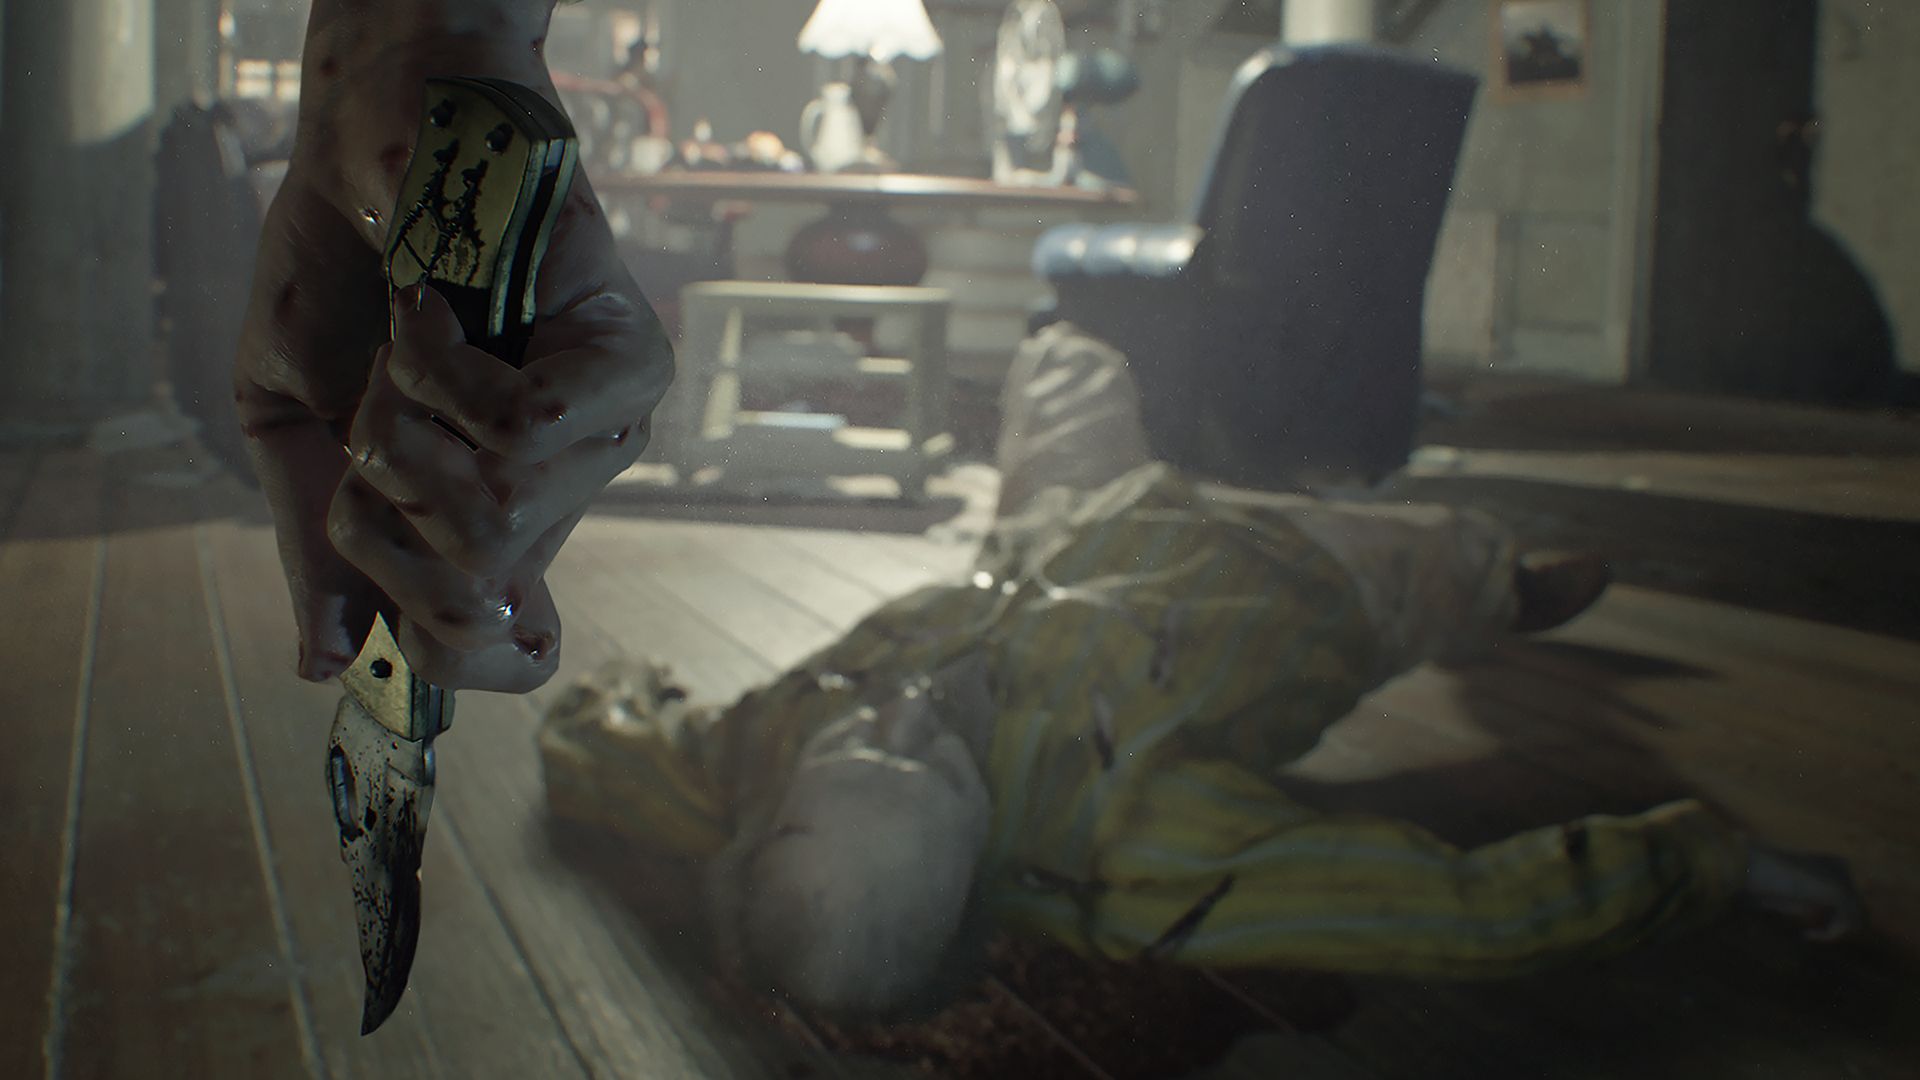 Image for Resident Evil 7 Kitchen demo will be available for download in Europe when PS VR launches